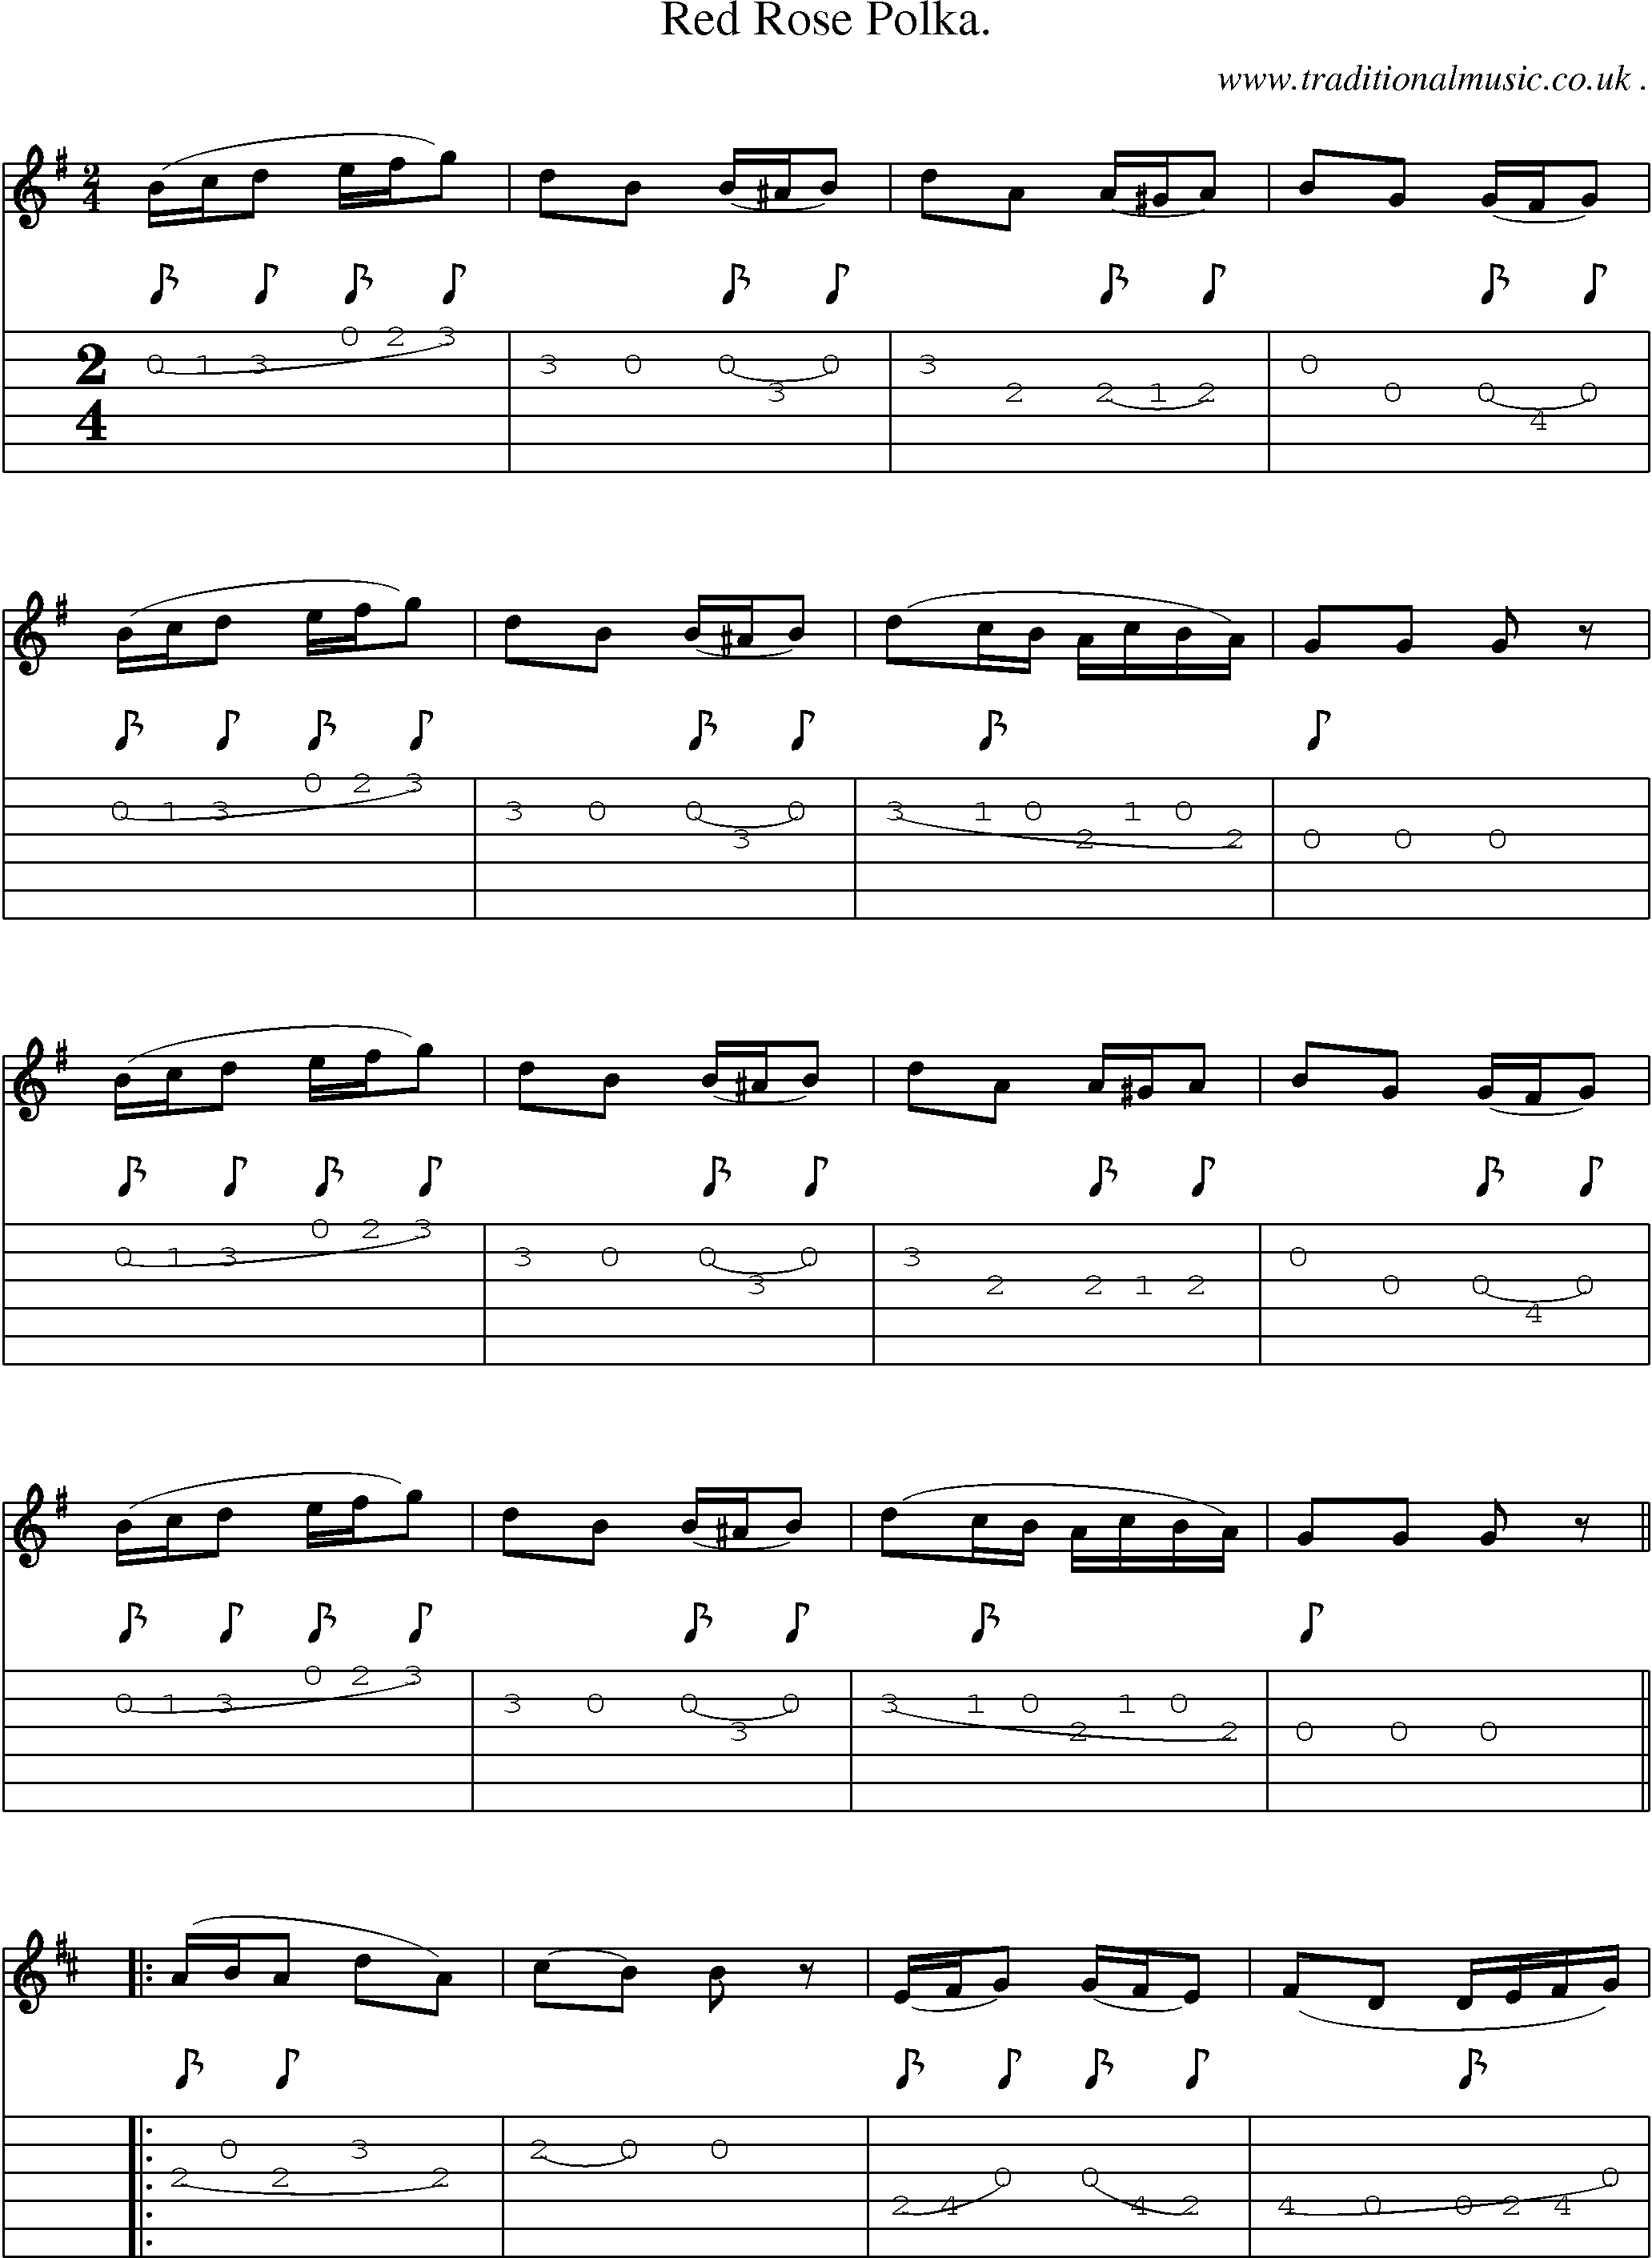 Sheet-Music and Guitar Tabs for Red Rose Polka